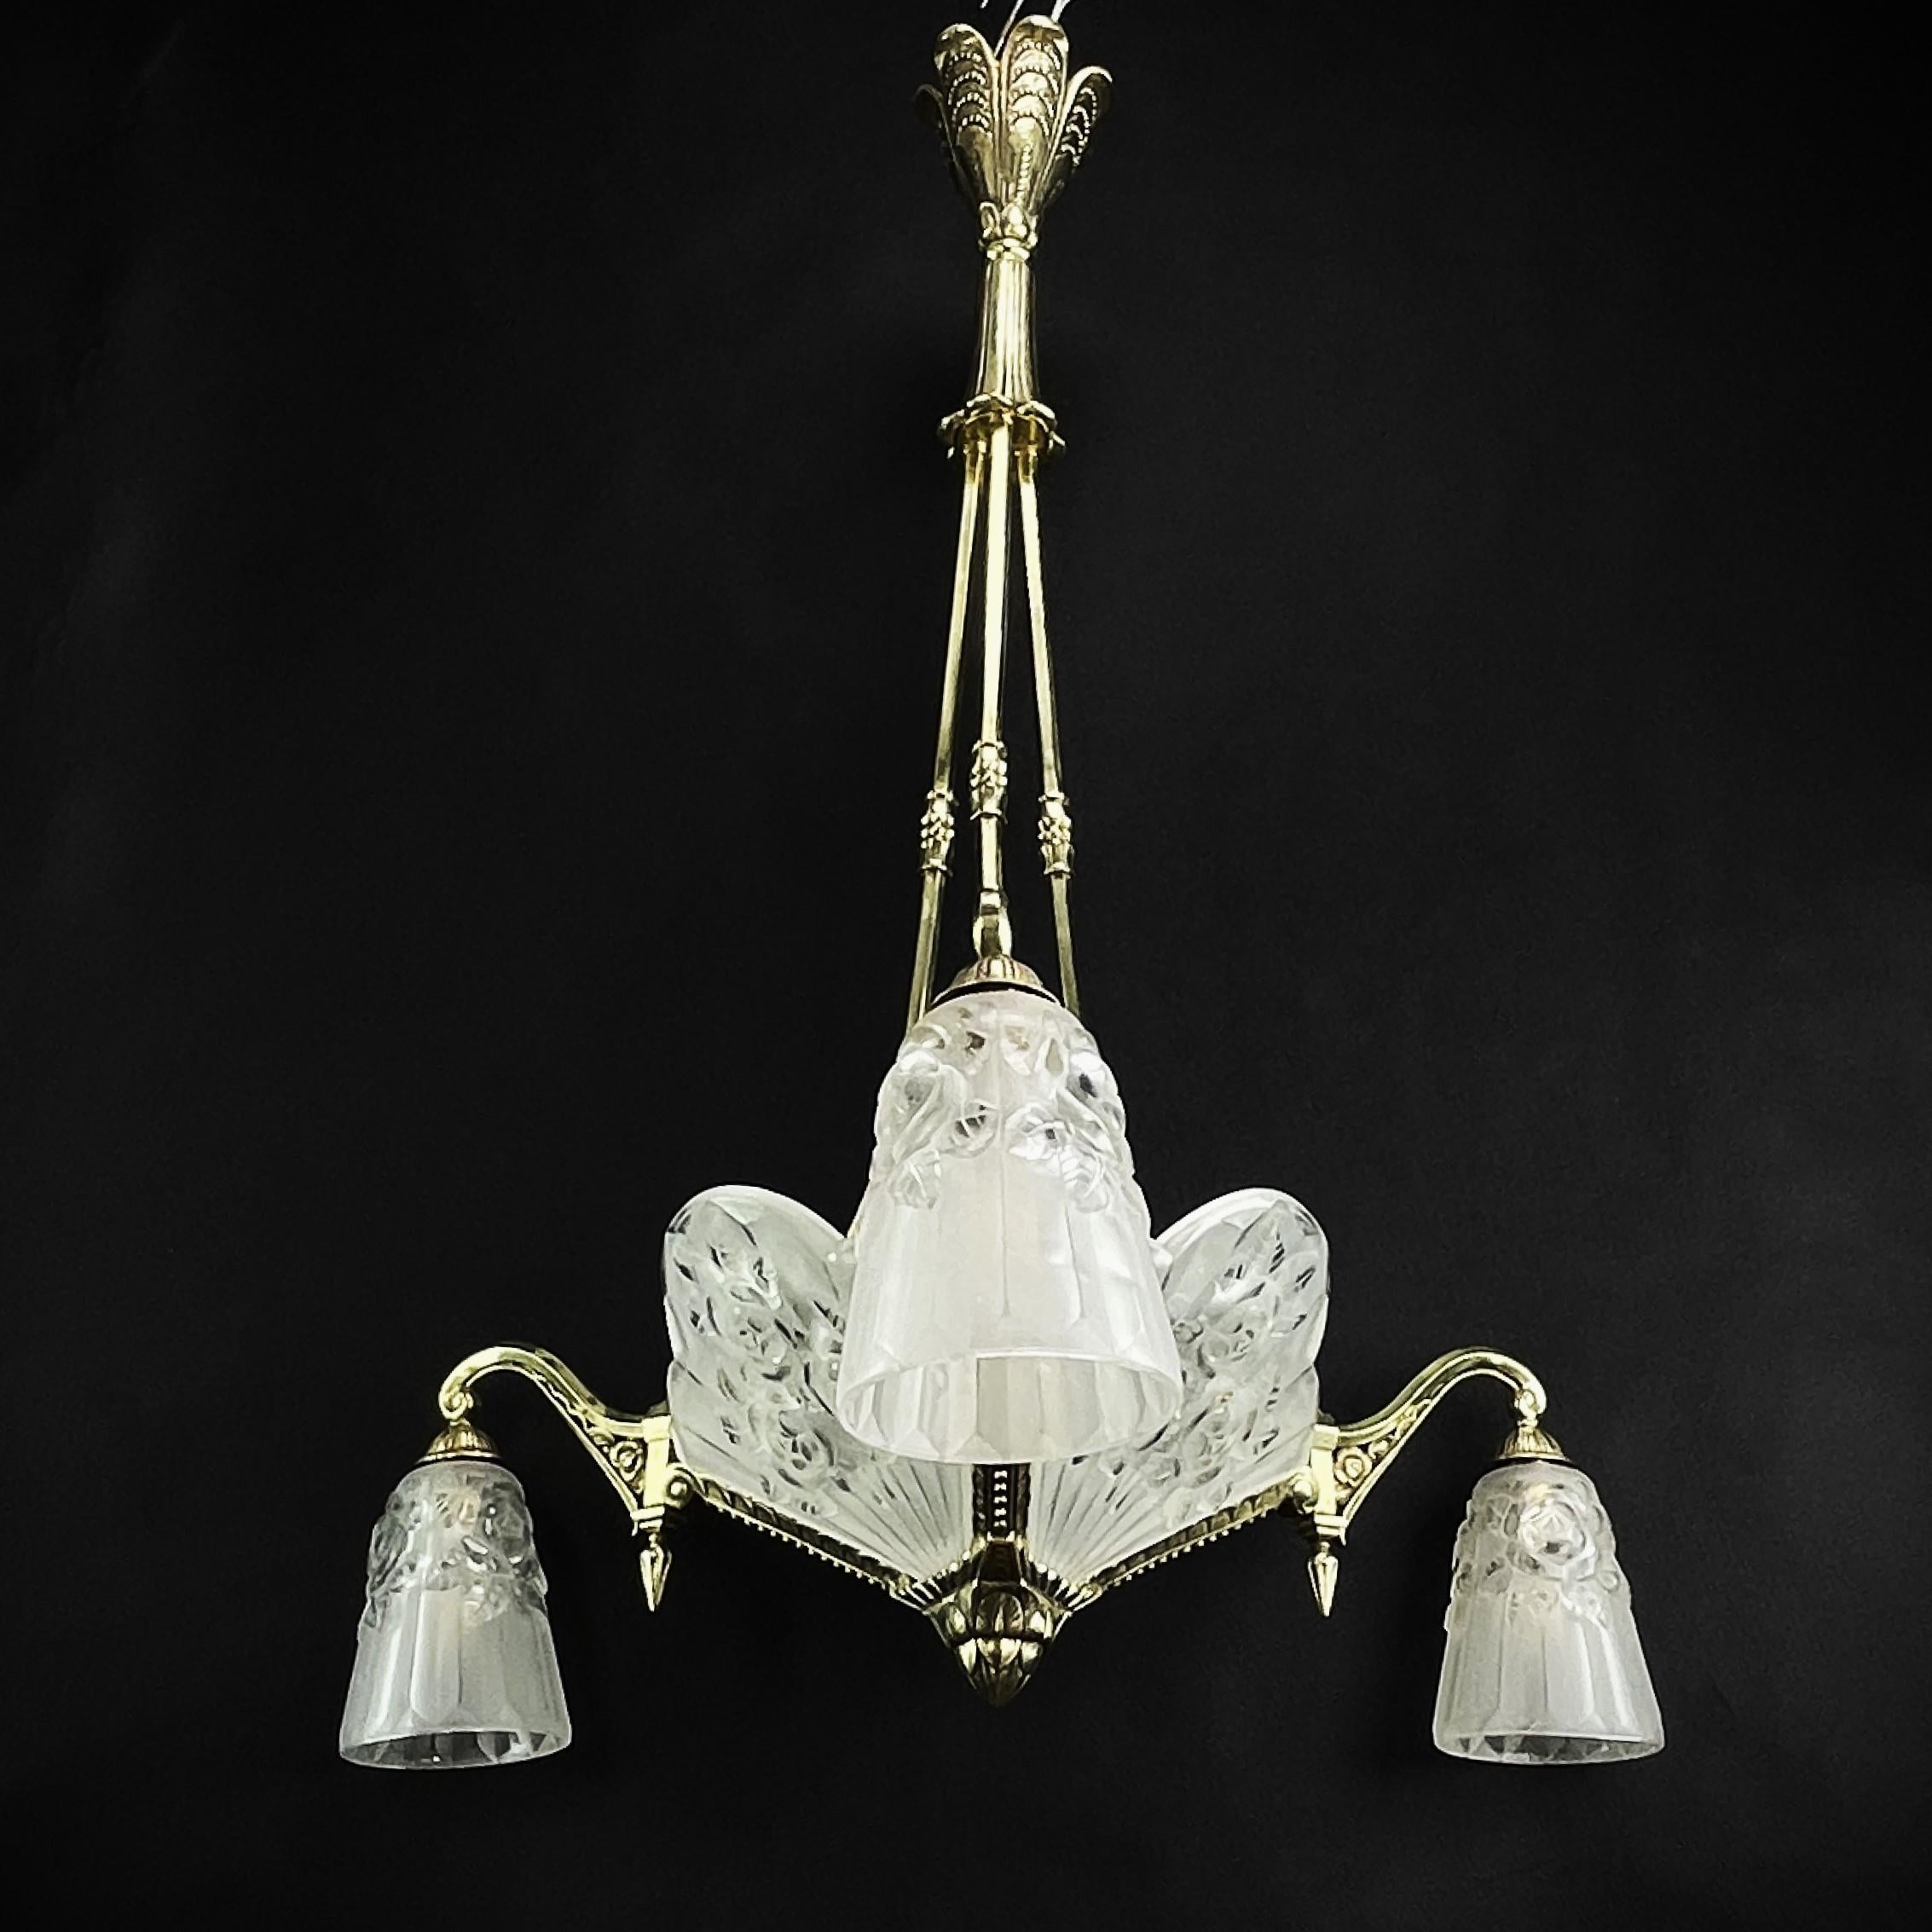 The ART DECO ceiling lamp is a remarkable example of early 20th century craftsmanship and style. 

The signature 